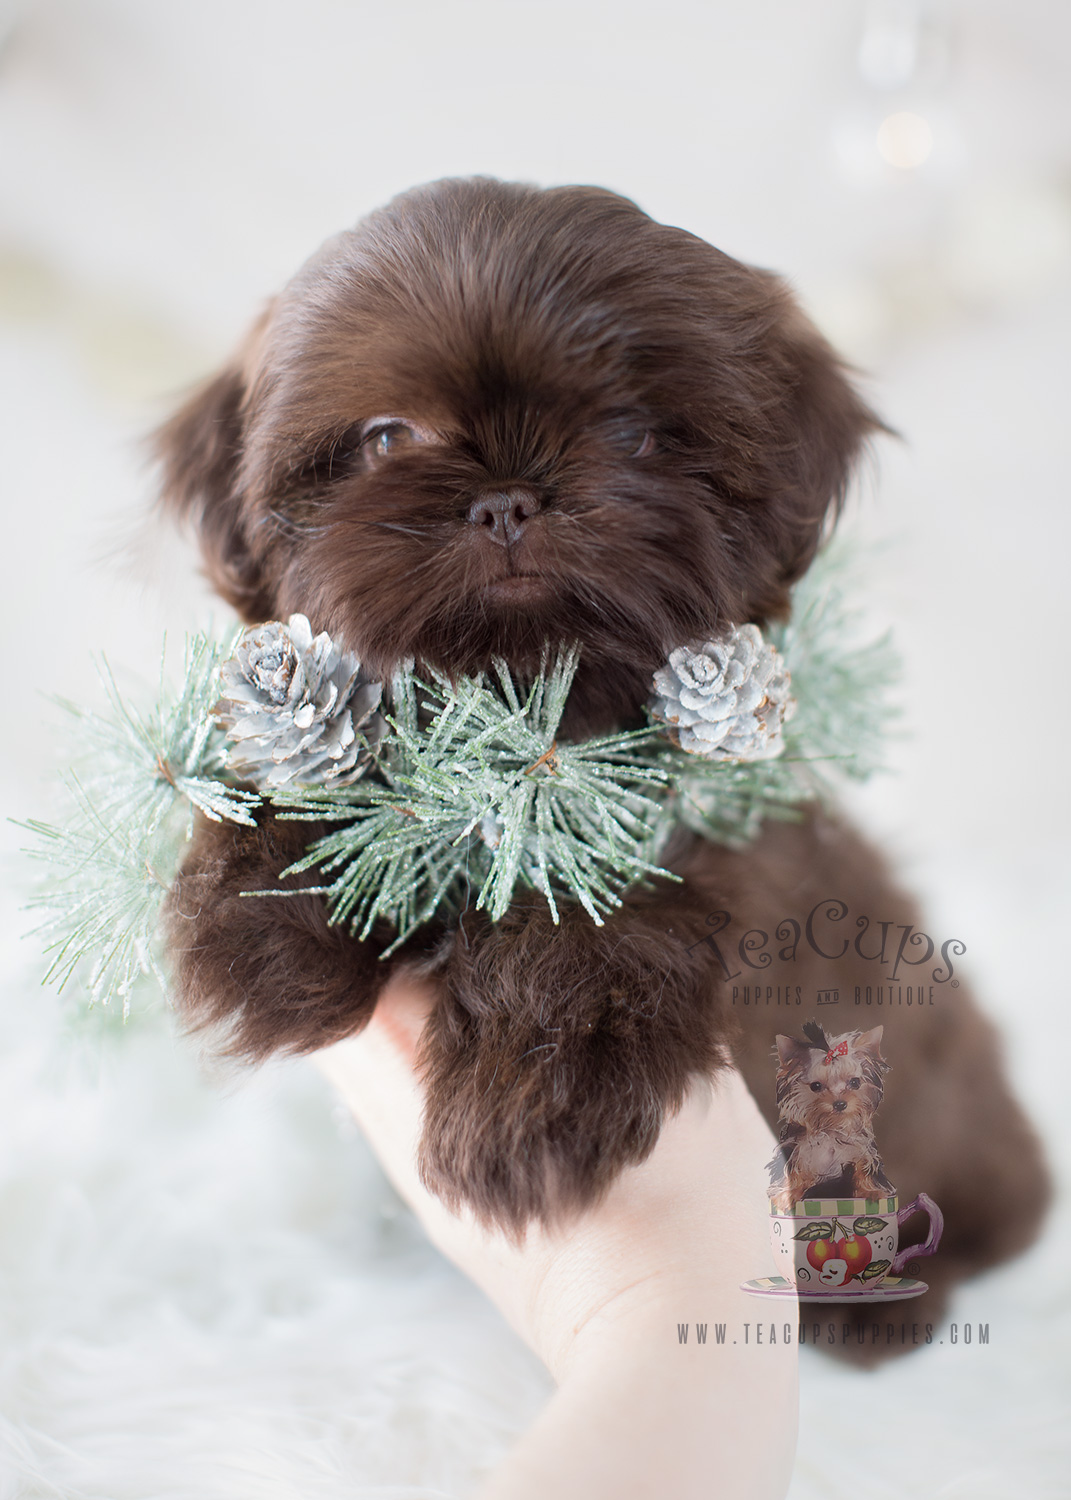 The Shih Tzu of your dreams is here! Teacup Puppies